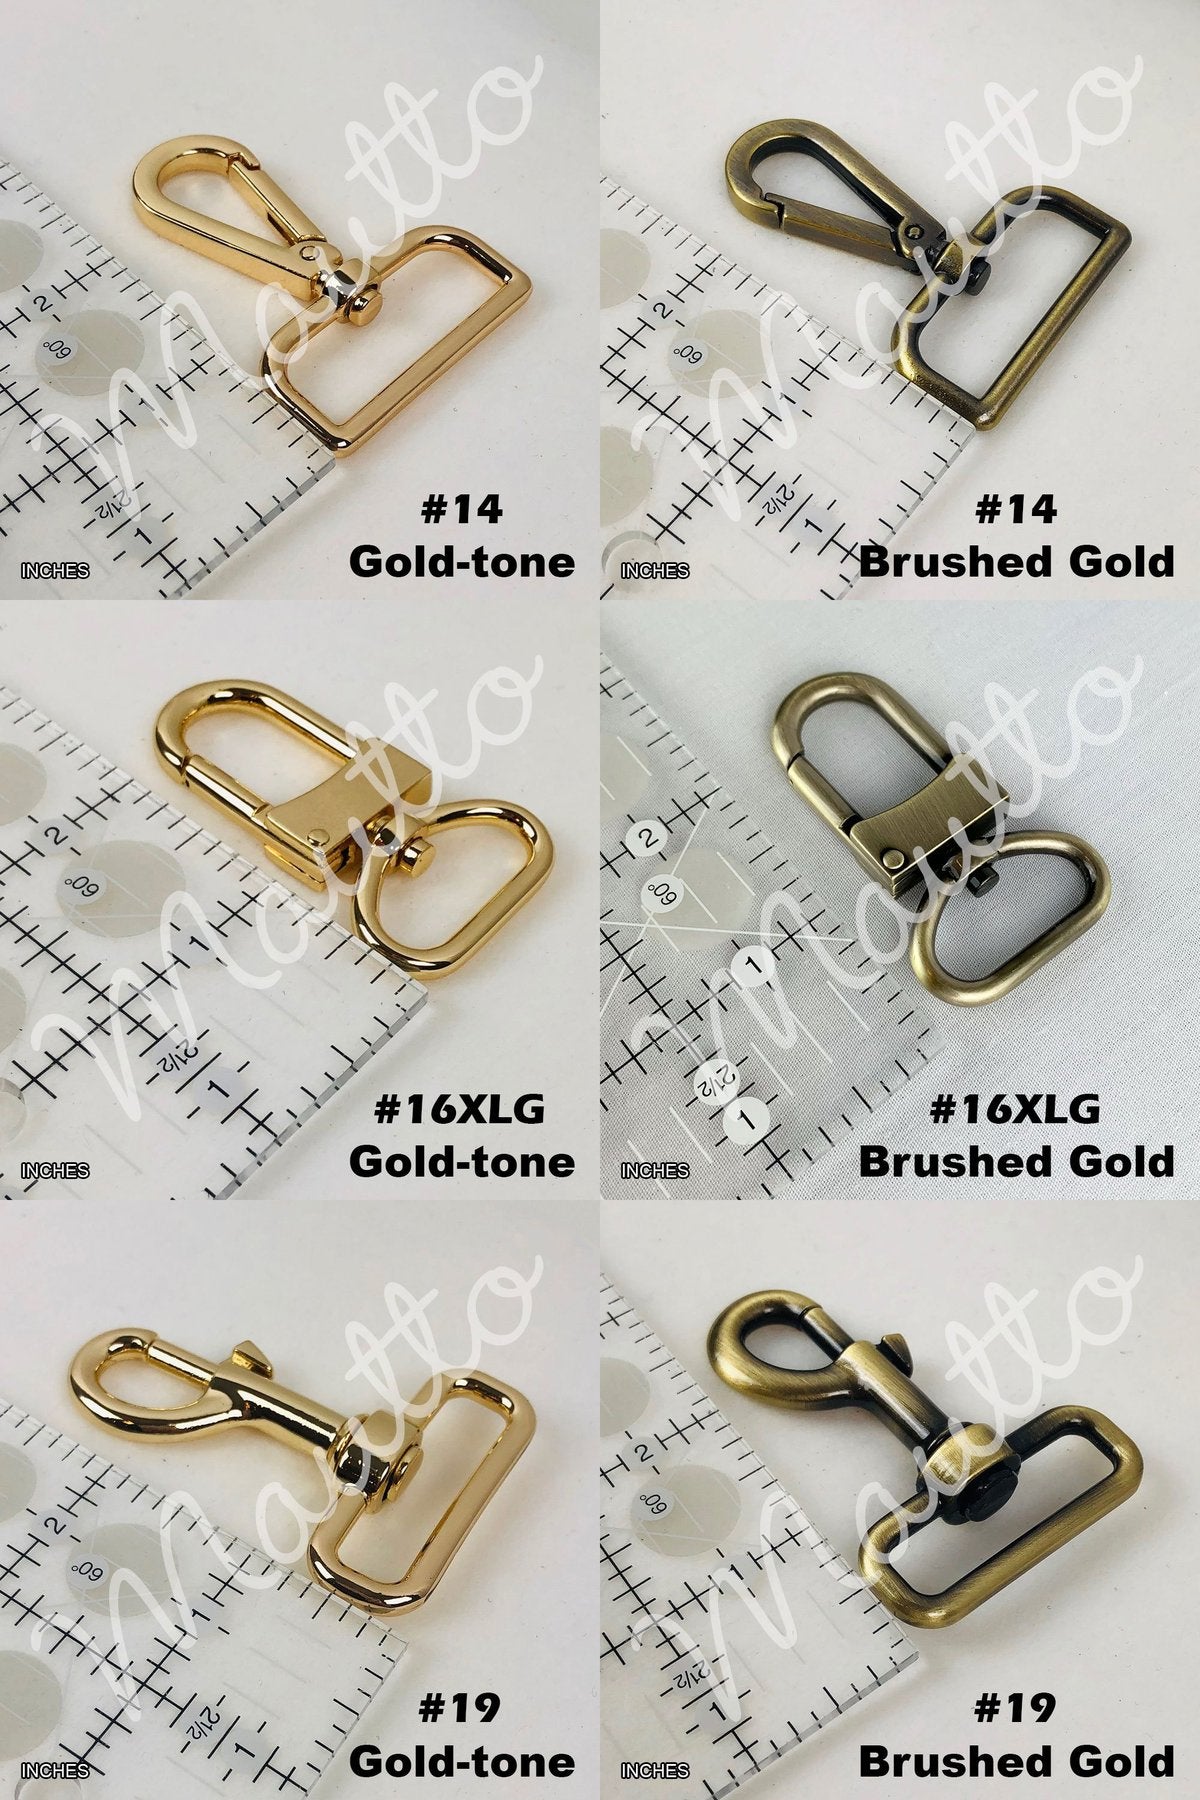 Strap Extender for Purses and Bags - Large Clip for Bags with Thick  Hardware - Heavy Duty Gold-tone Chain & Swiveling Clip